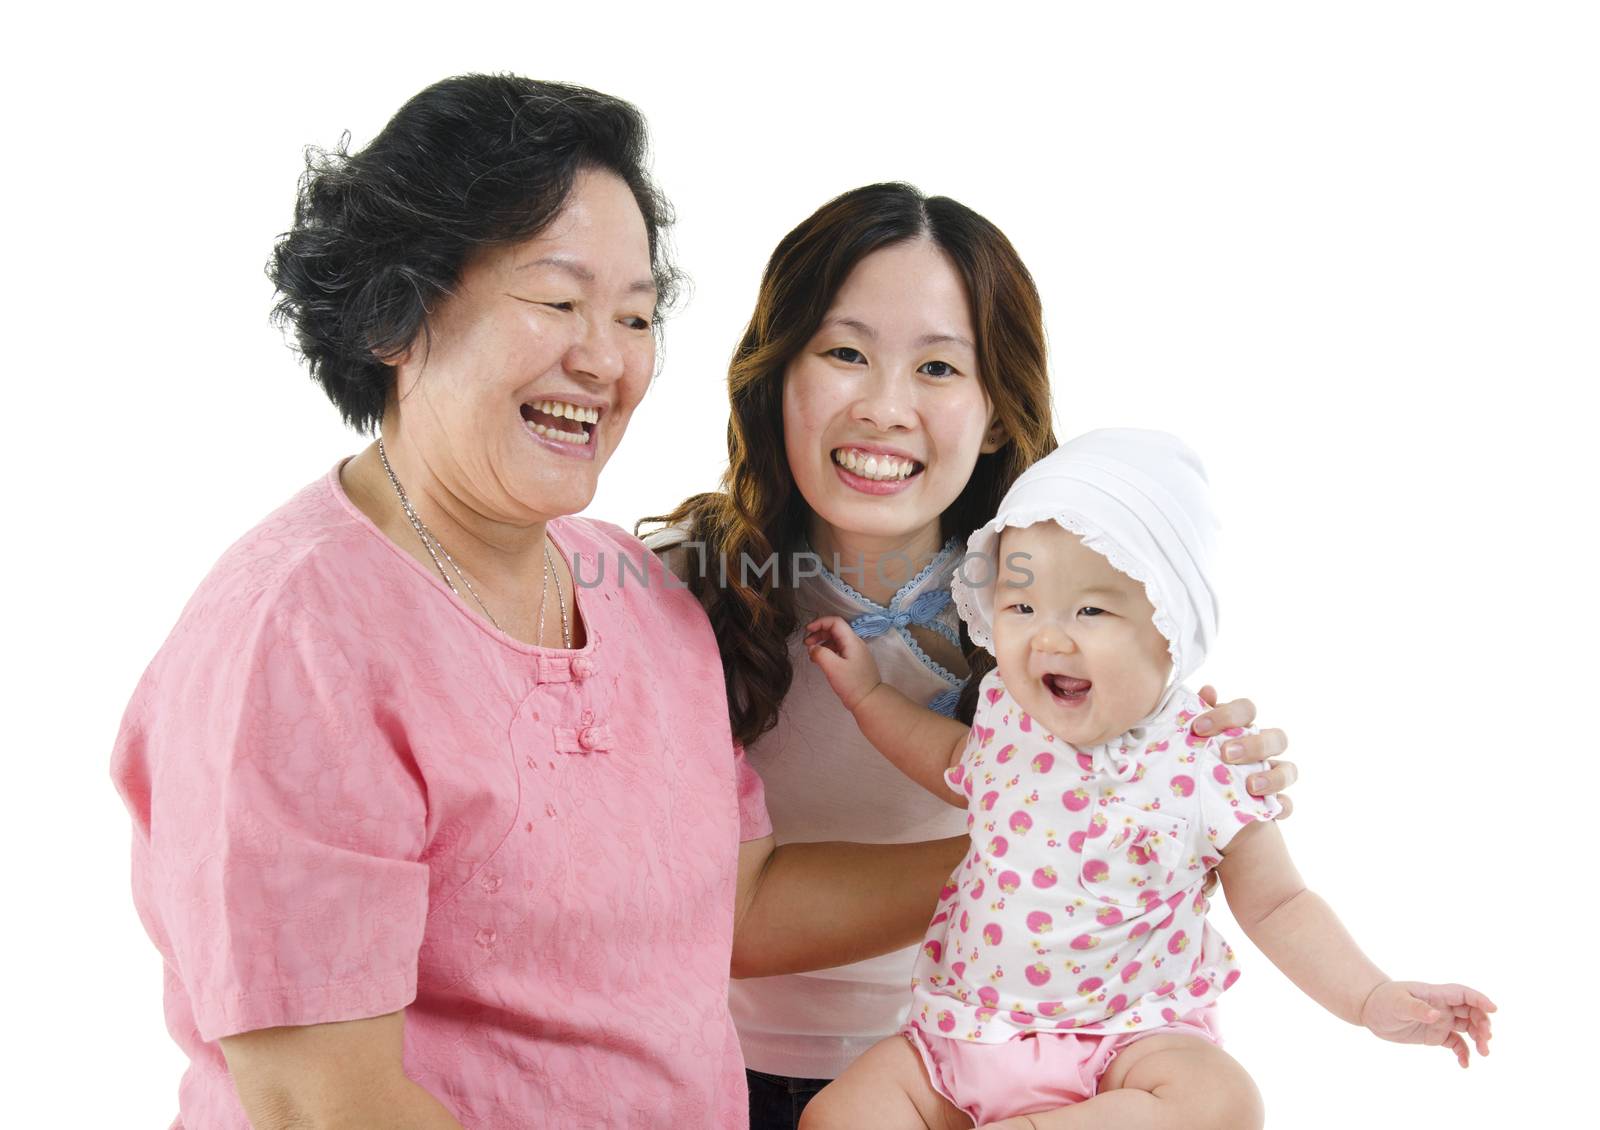 Portrait of happy three generations Asian family, senior woman, adult daughter and baby girl, isolated on white background.